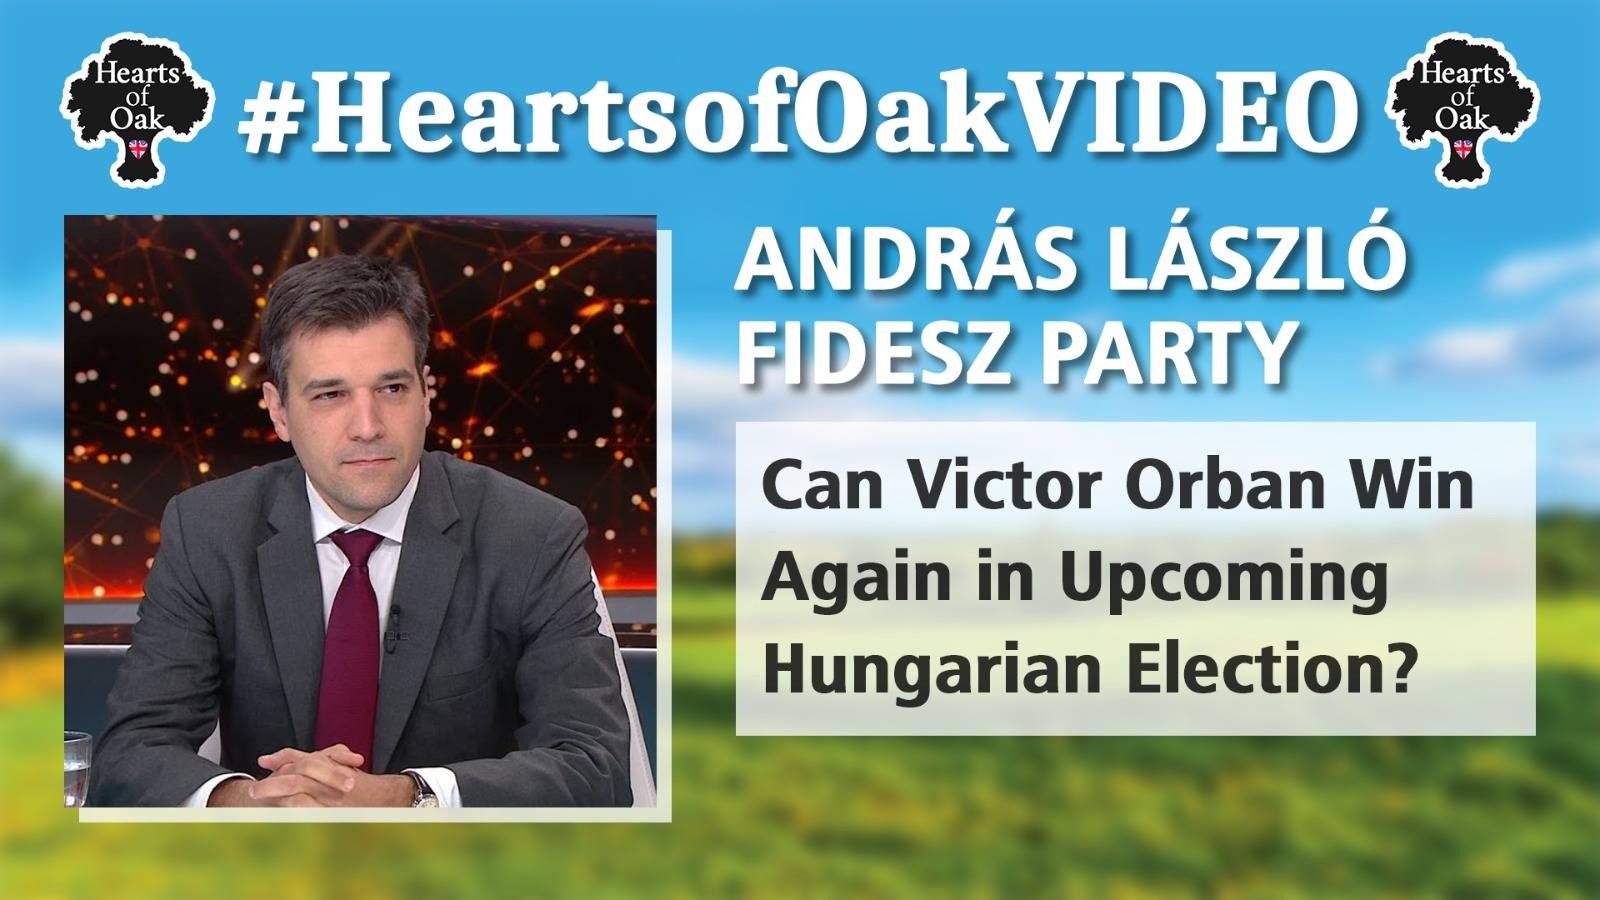 András László: Fidesz Party - Can Victor Orban Win Again in Upcoming Hungarian Election